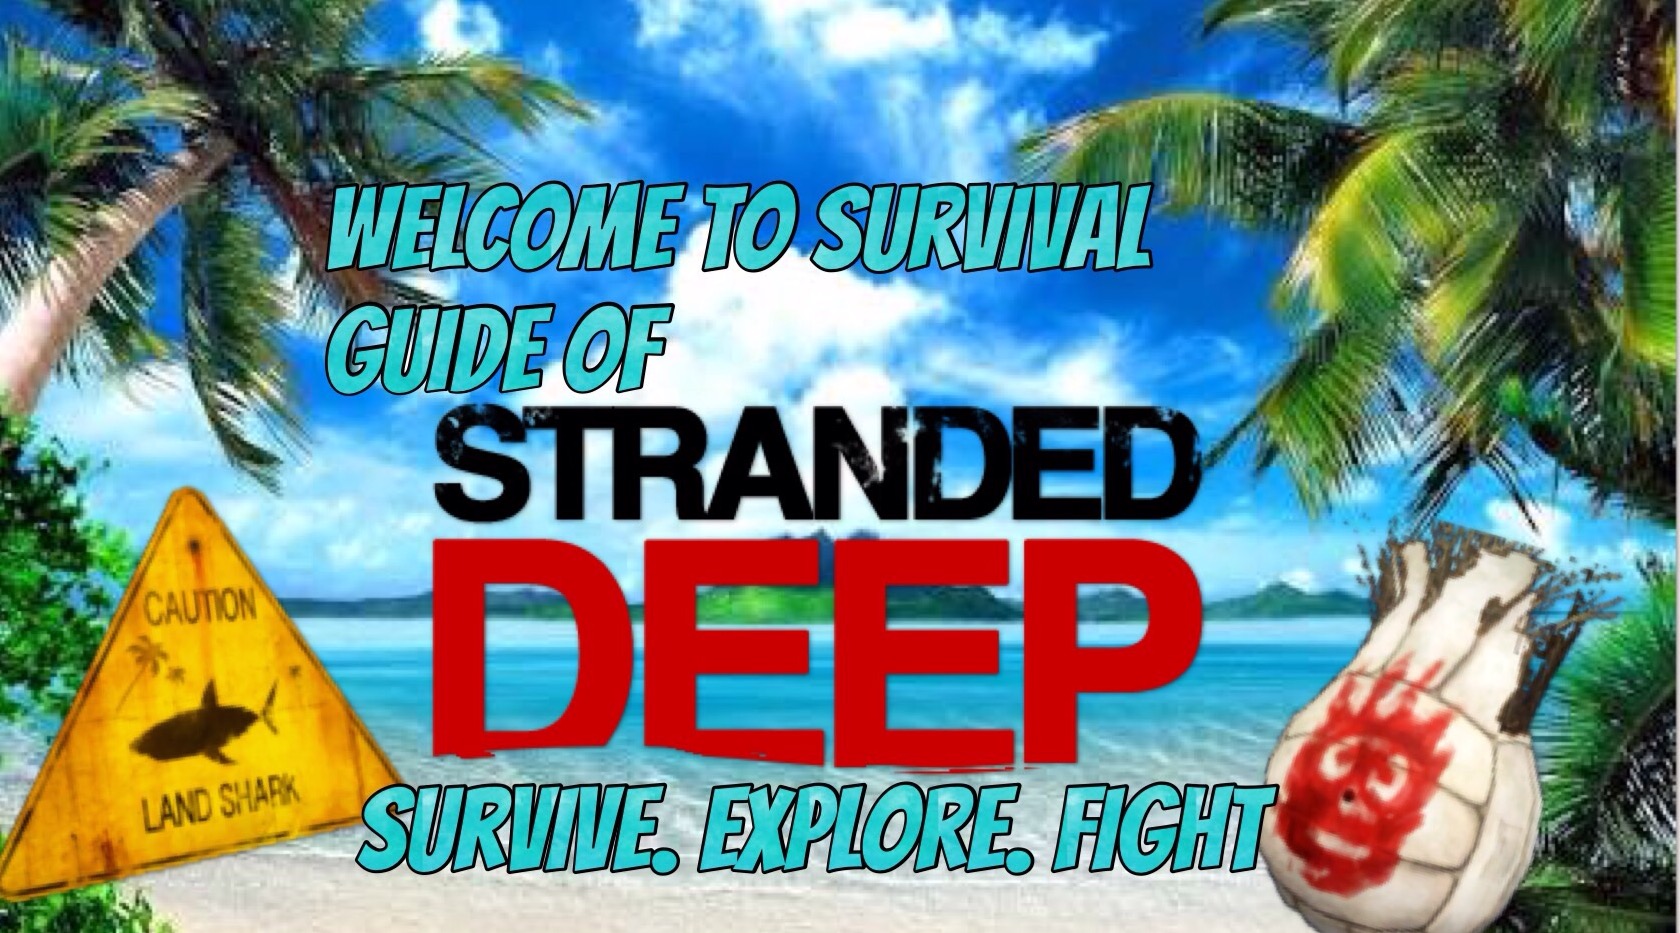 Steam Community :: Guide :: Stranded Deep - Unofficial Wikipedia Guide  (Updated - 01/12/2017)